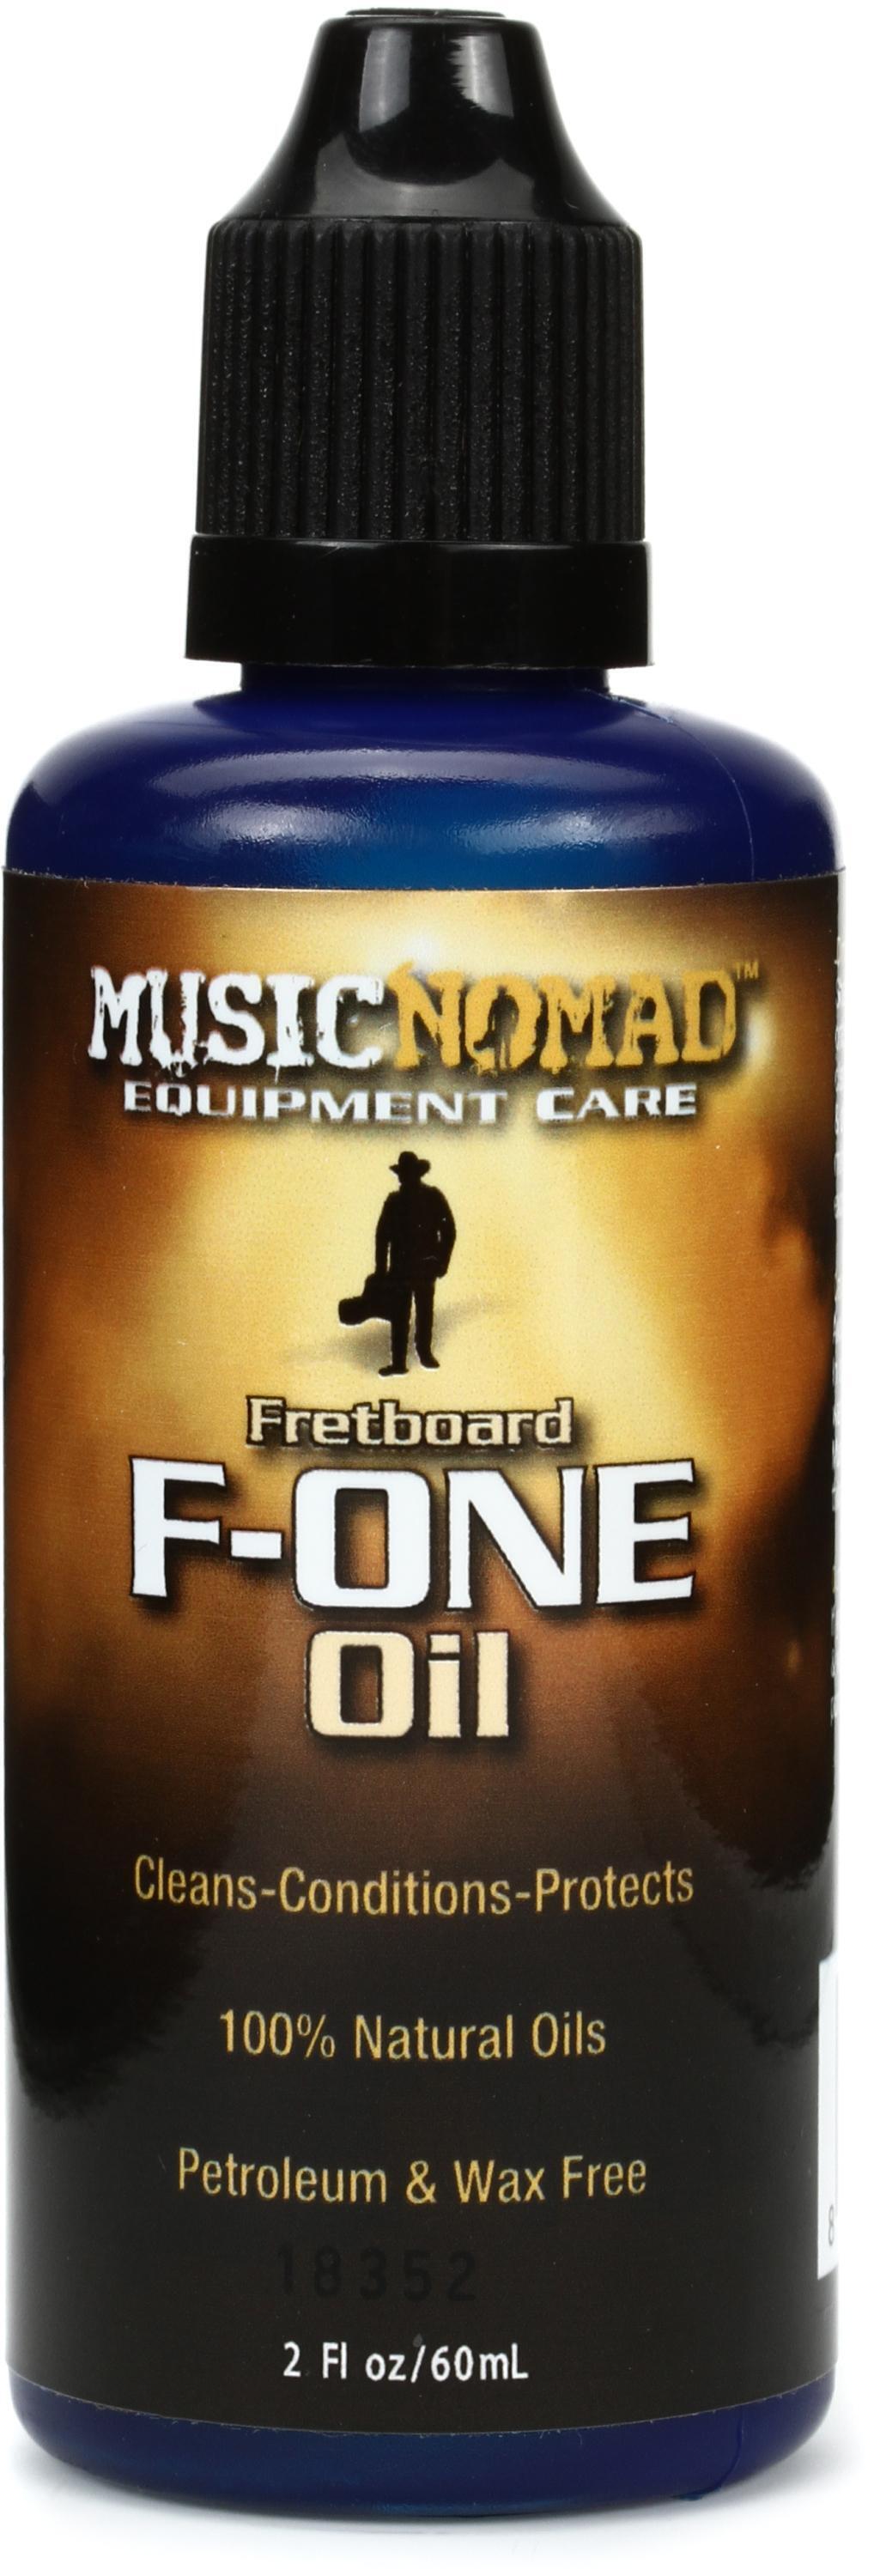 MusicNomad F-ONE Oil Fretboard Cleaner & Conditioner - 2-oz. Bottle